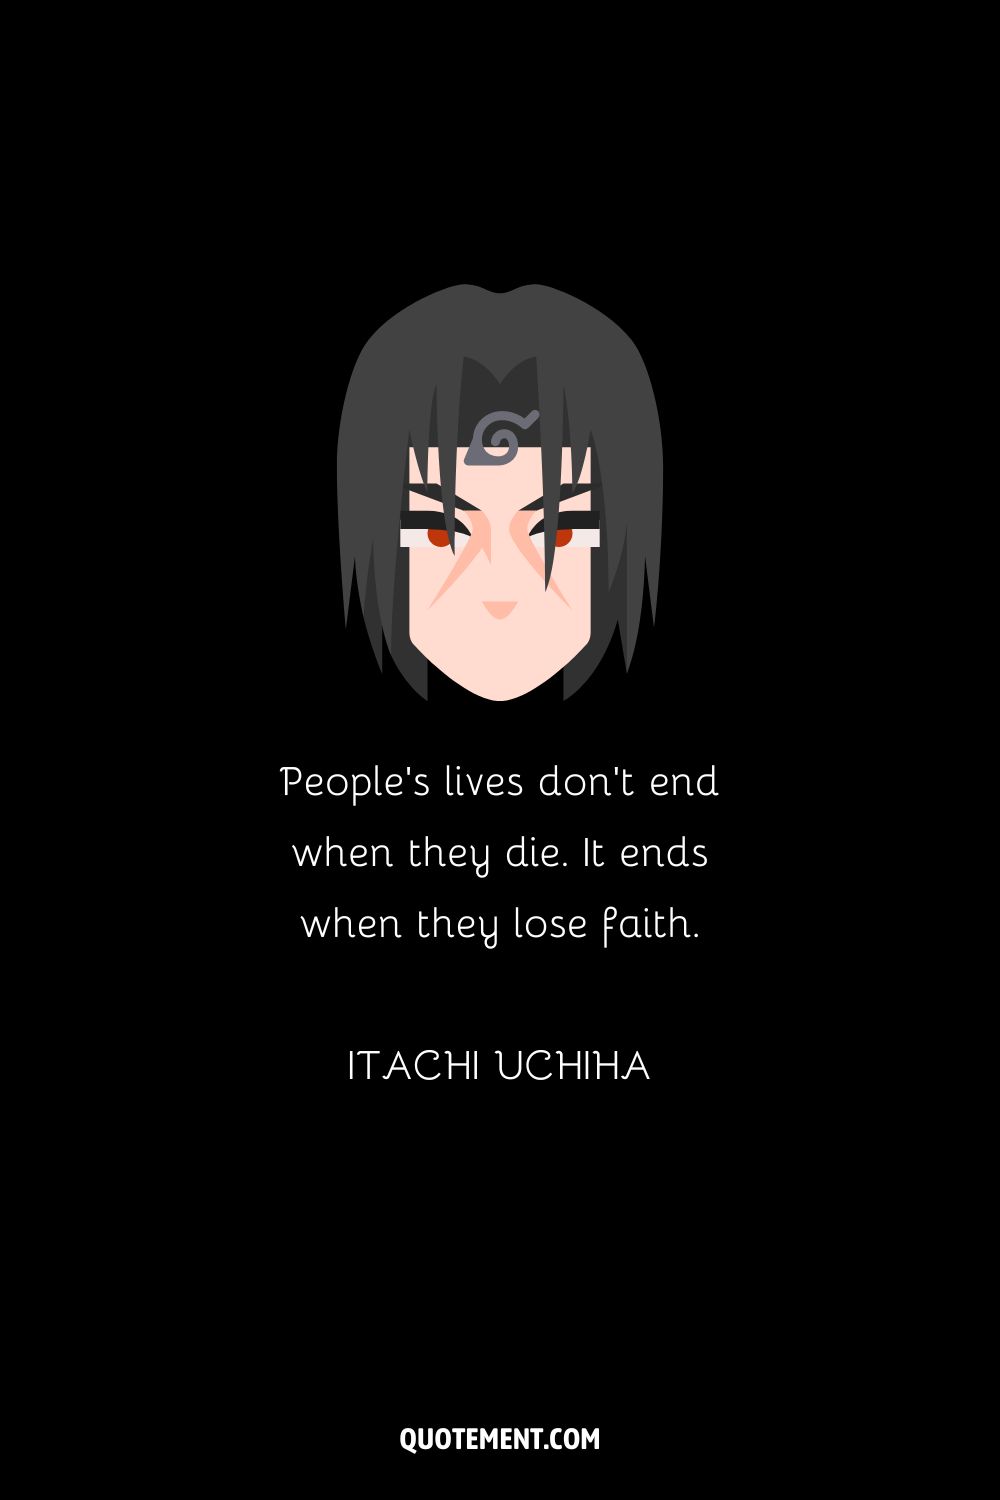 “People’s lives don’t end when they die. It ends when they lose faith.” — Itachi Uchiha